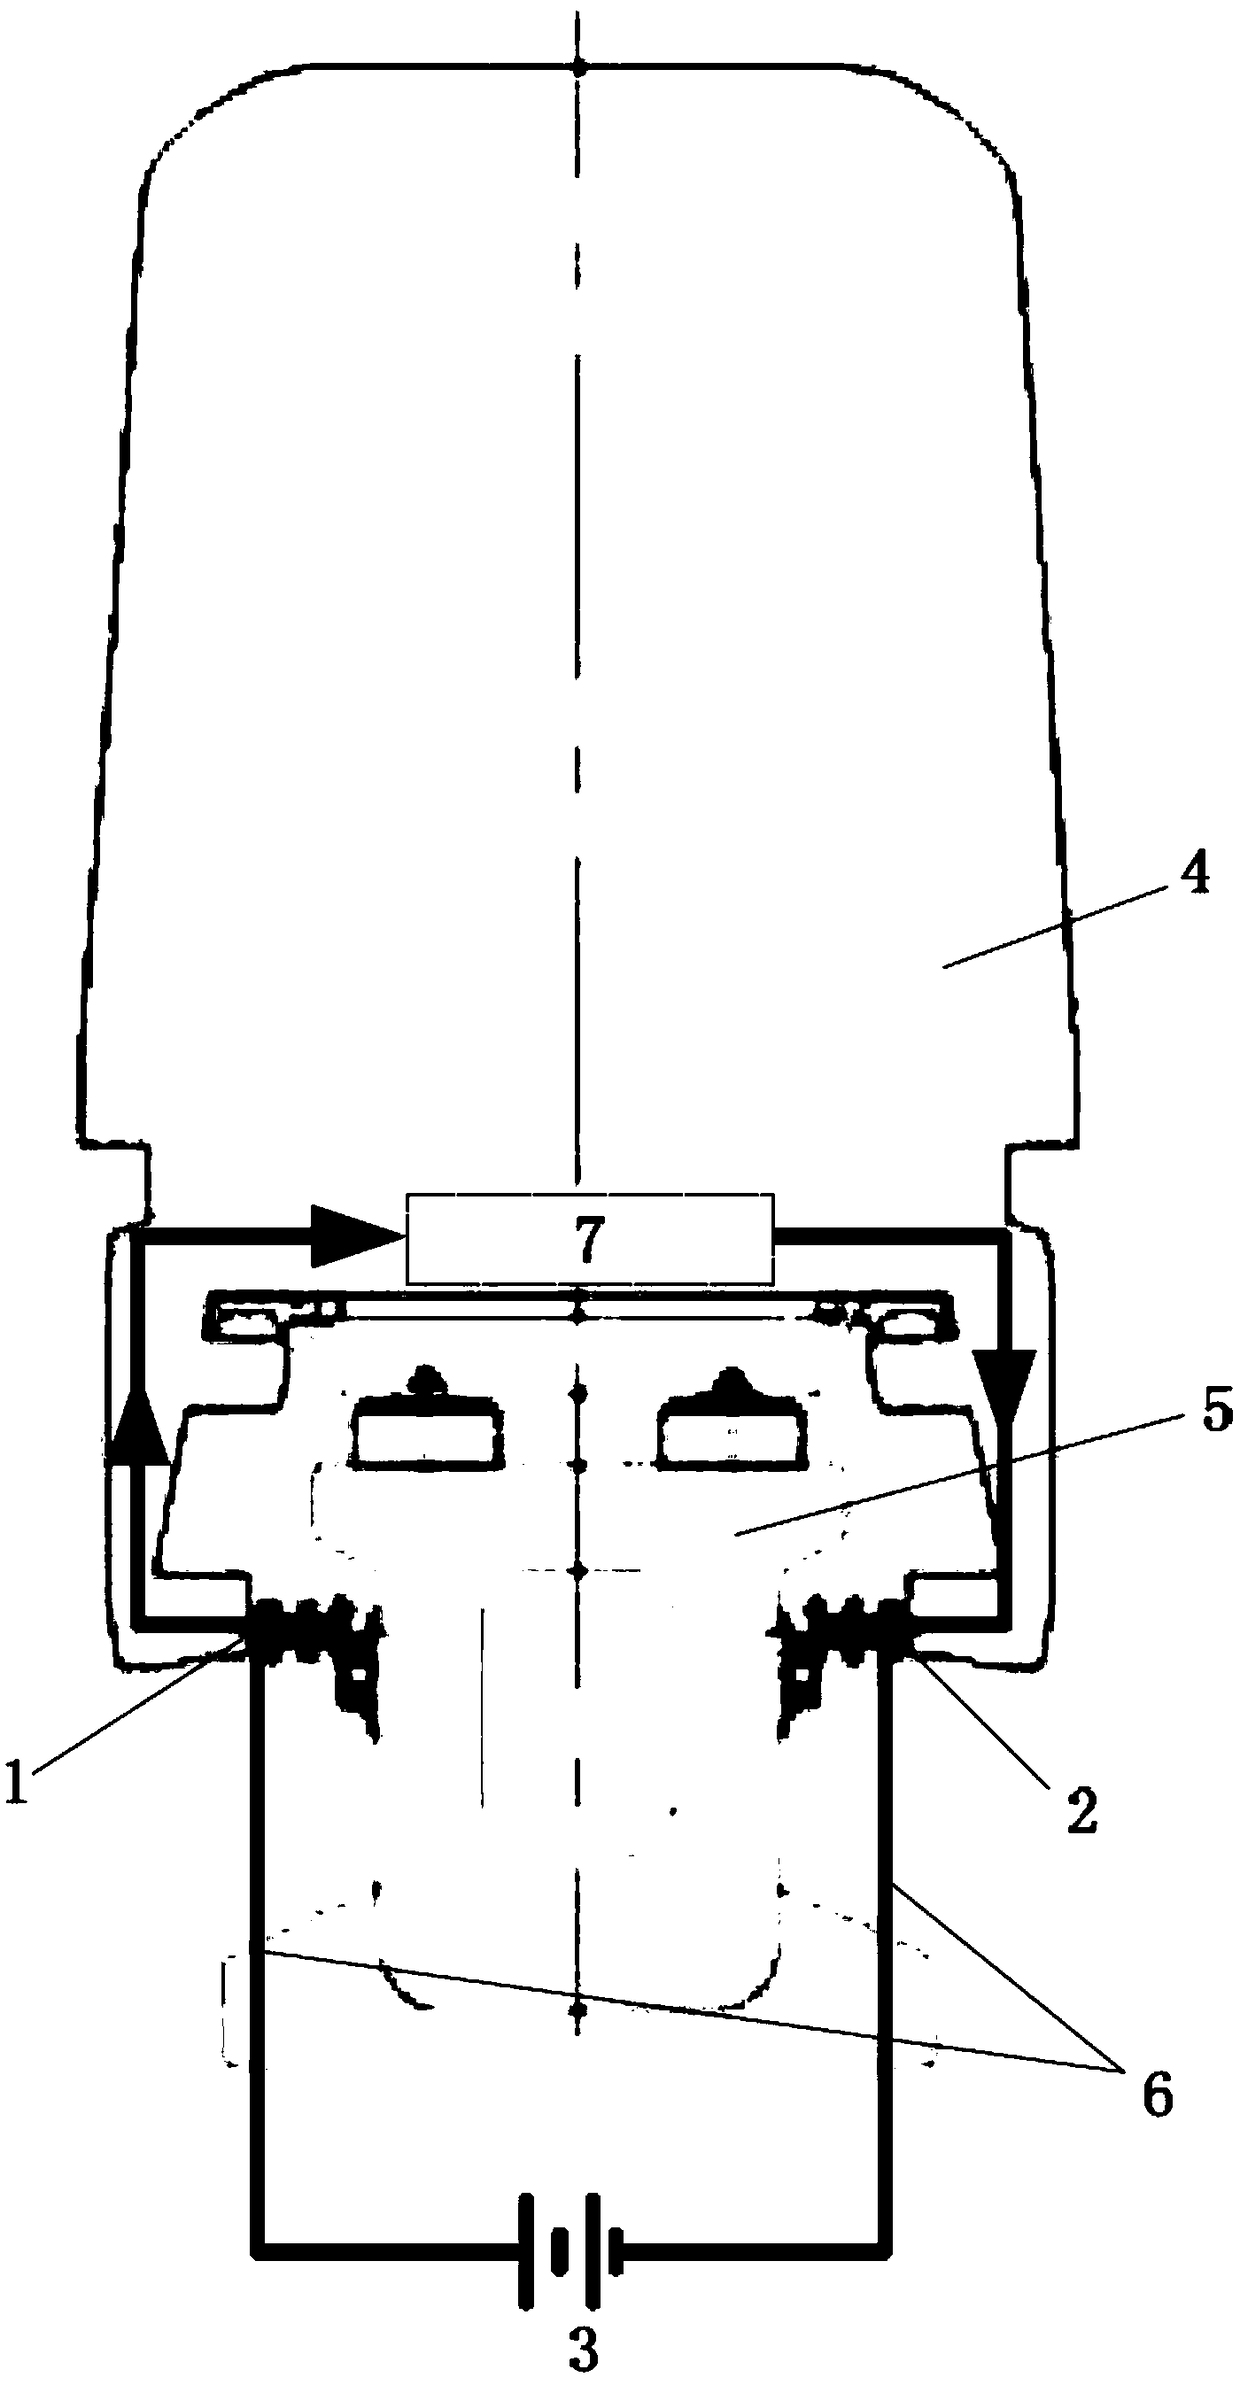 A heating circuit for a railway vehicle power supply contact rail